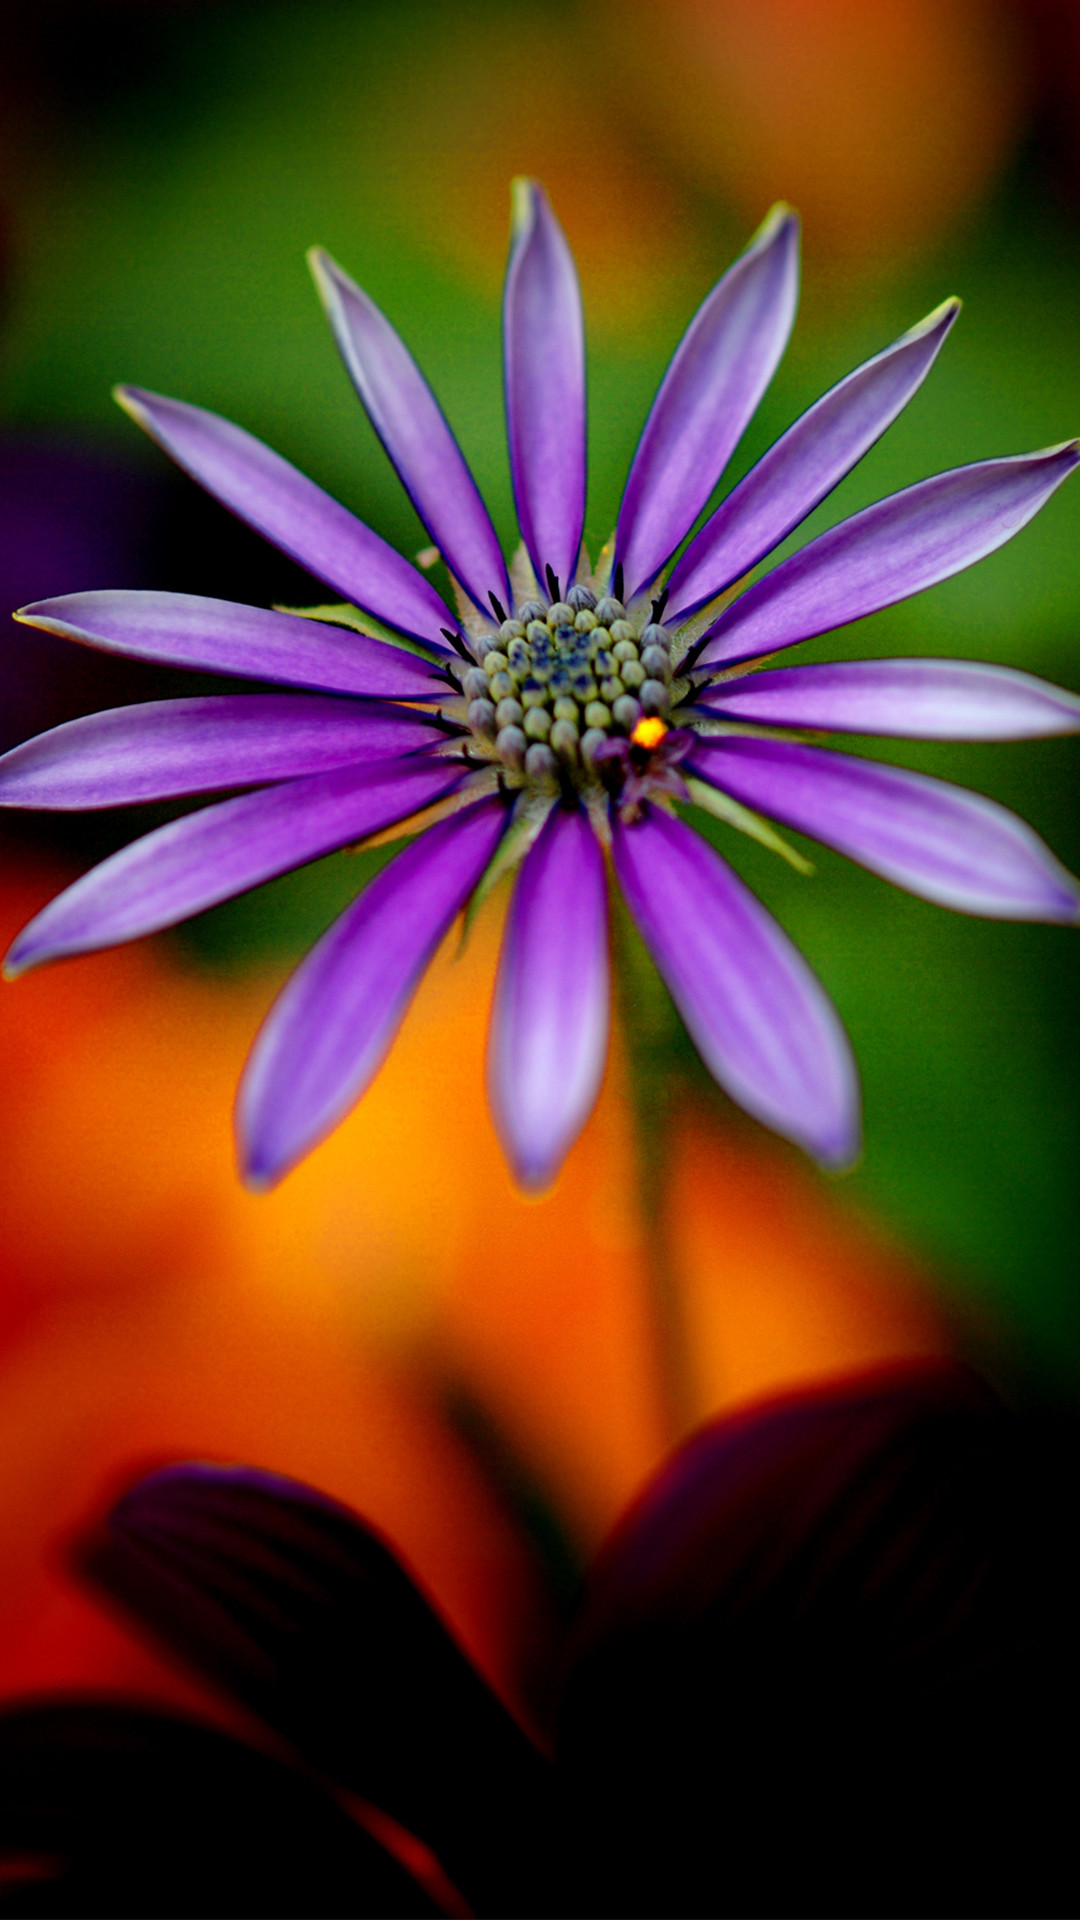 1080x1920 full hd wallpapers 1080p for mobile with purple flower full hd download  high definiton wallpapers amazing